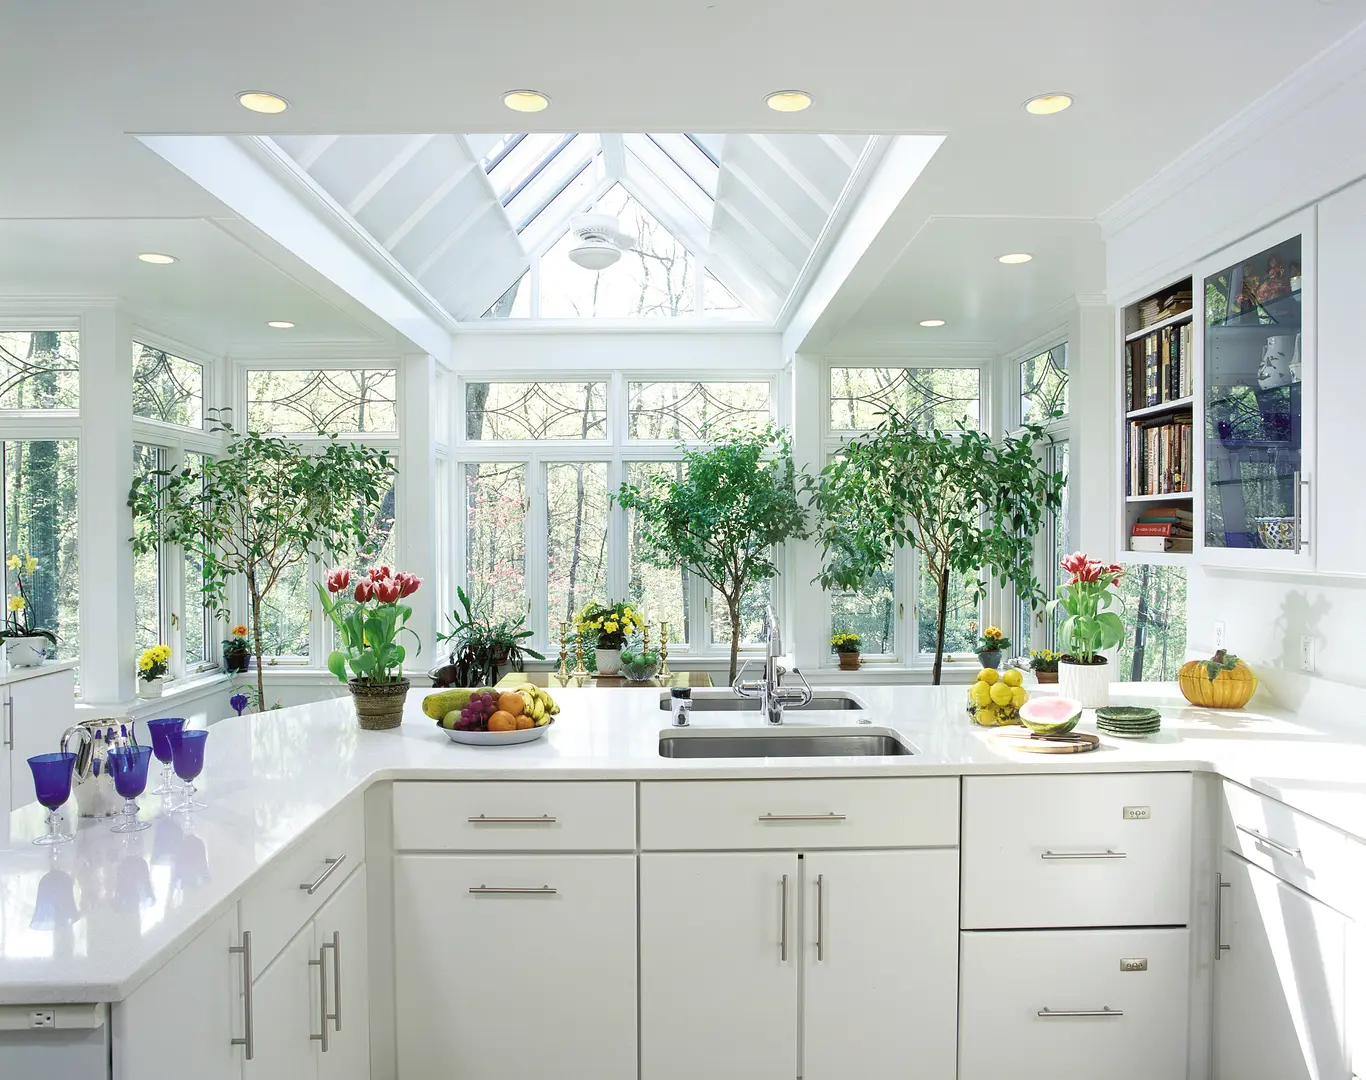 A kitchen with white cabinets and plants in the window.